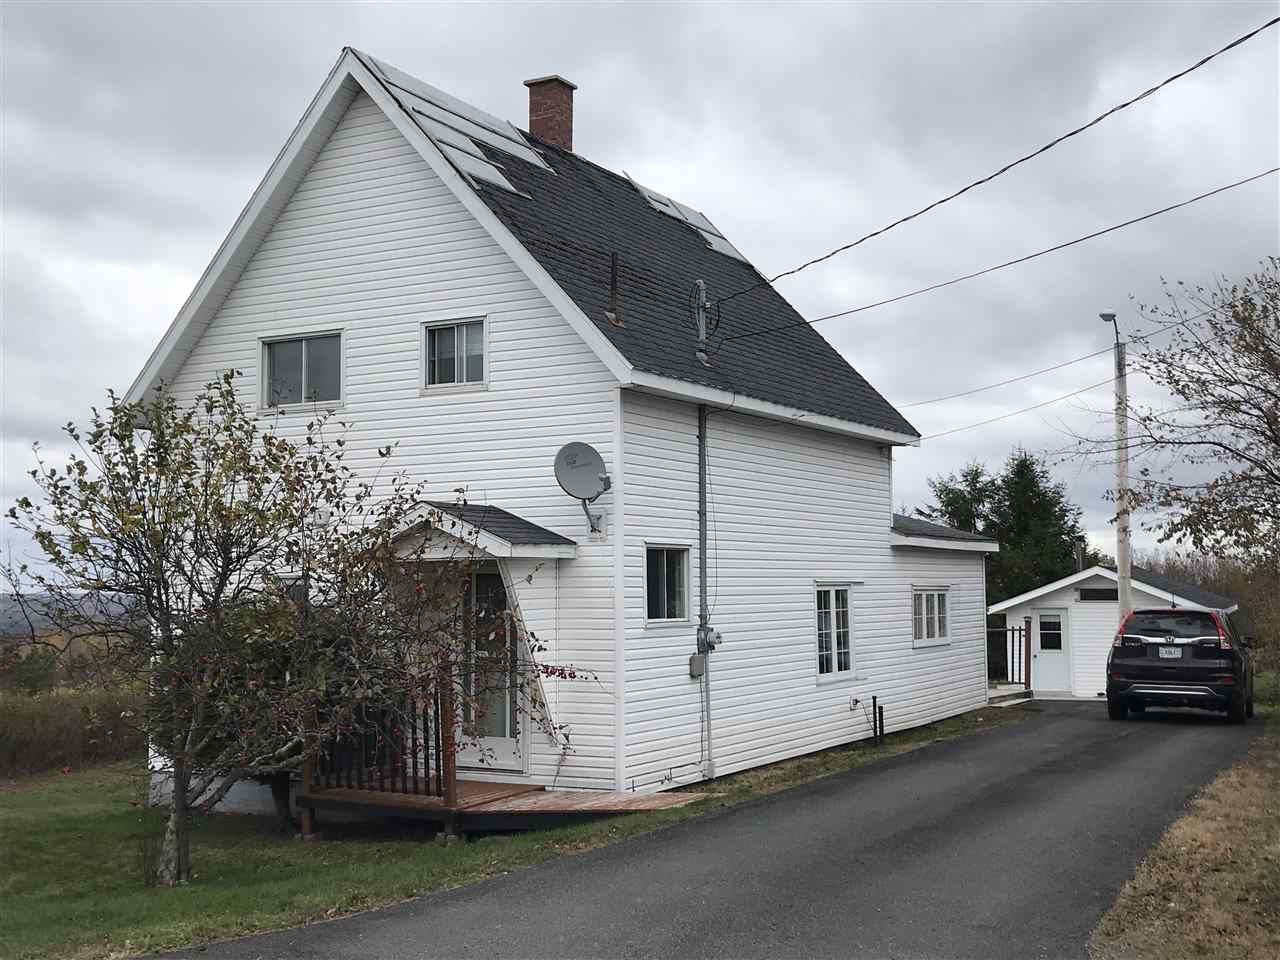 Main Photo: 7 McKay Street in Springhill: 102S-South Of Hwy 104, Parrsboro and area Residential for sale (Northern Region)  : MLS®# 202023274